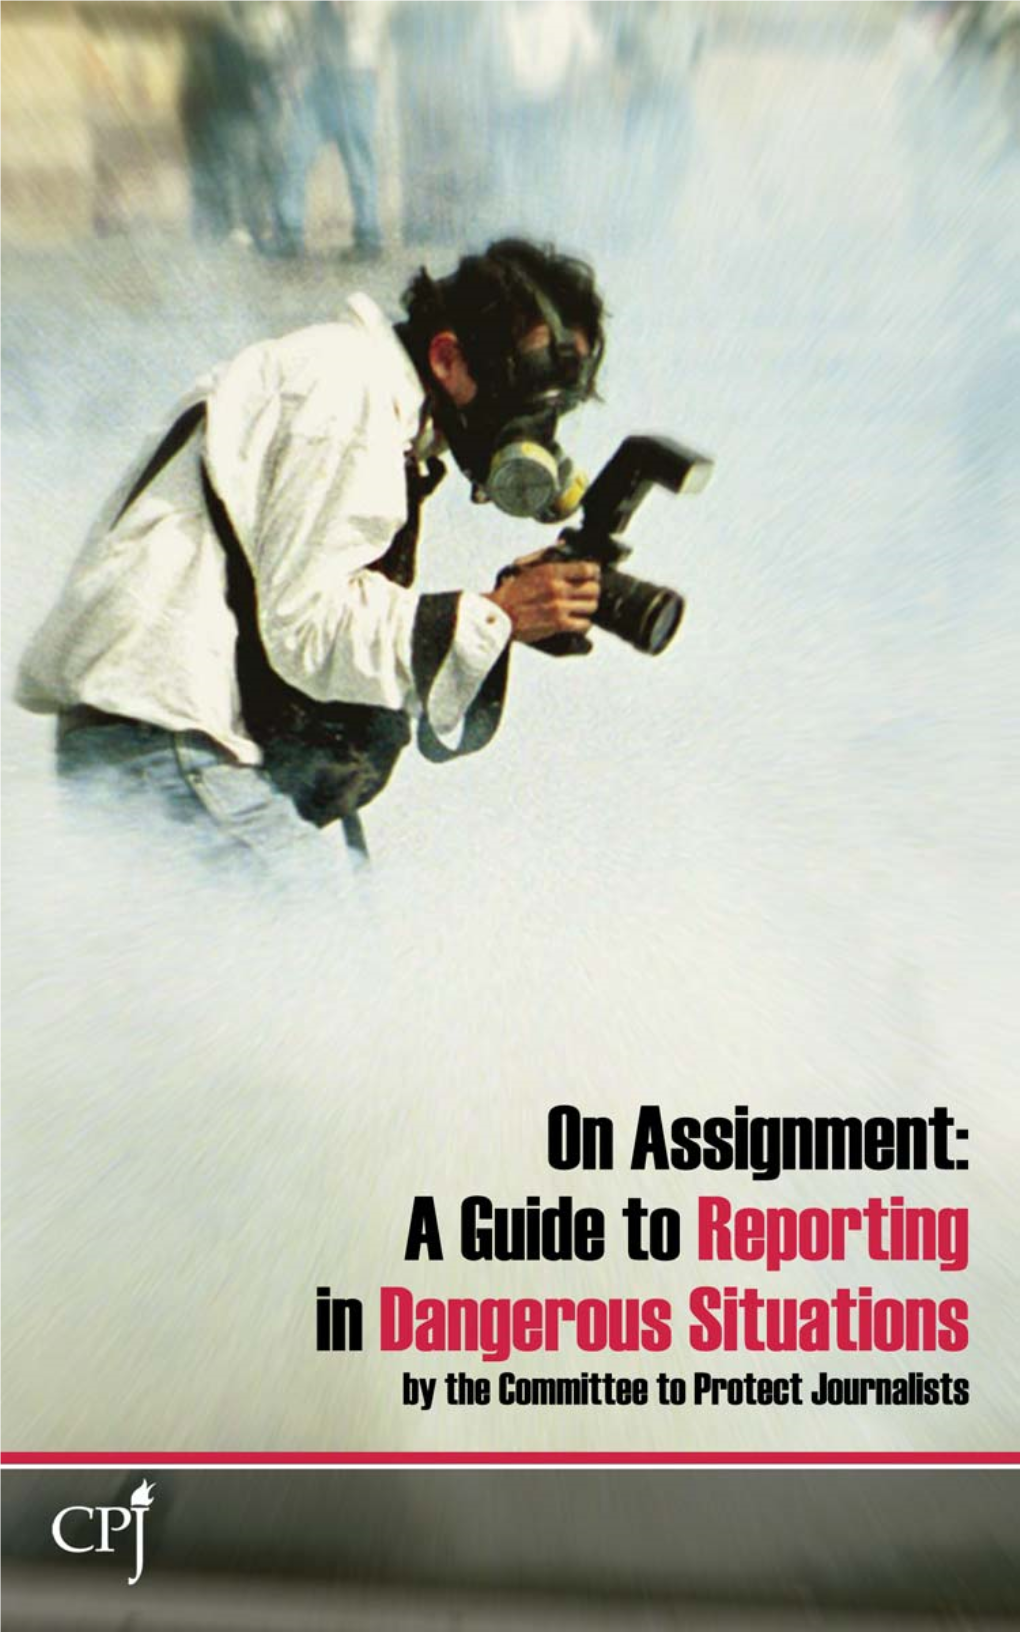 On Assignment: a Guide to Reporting in Dangerous Situations